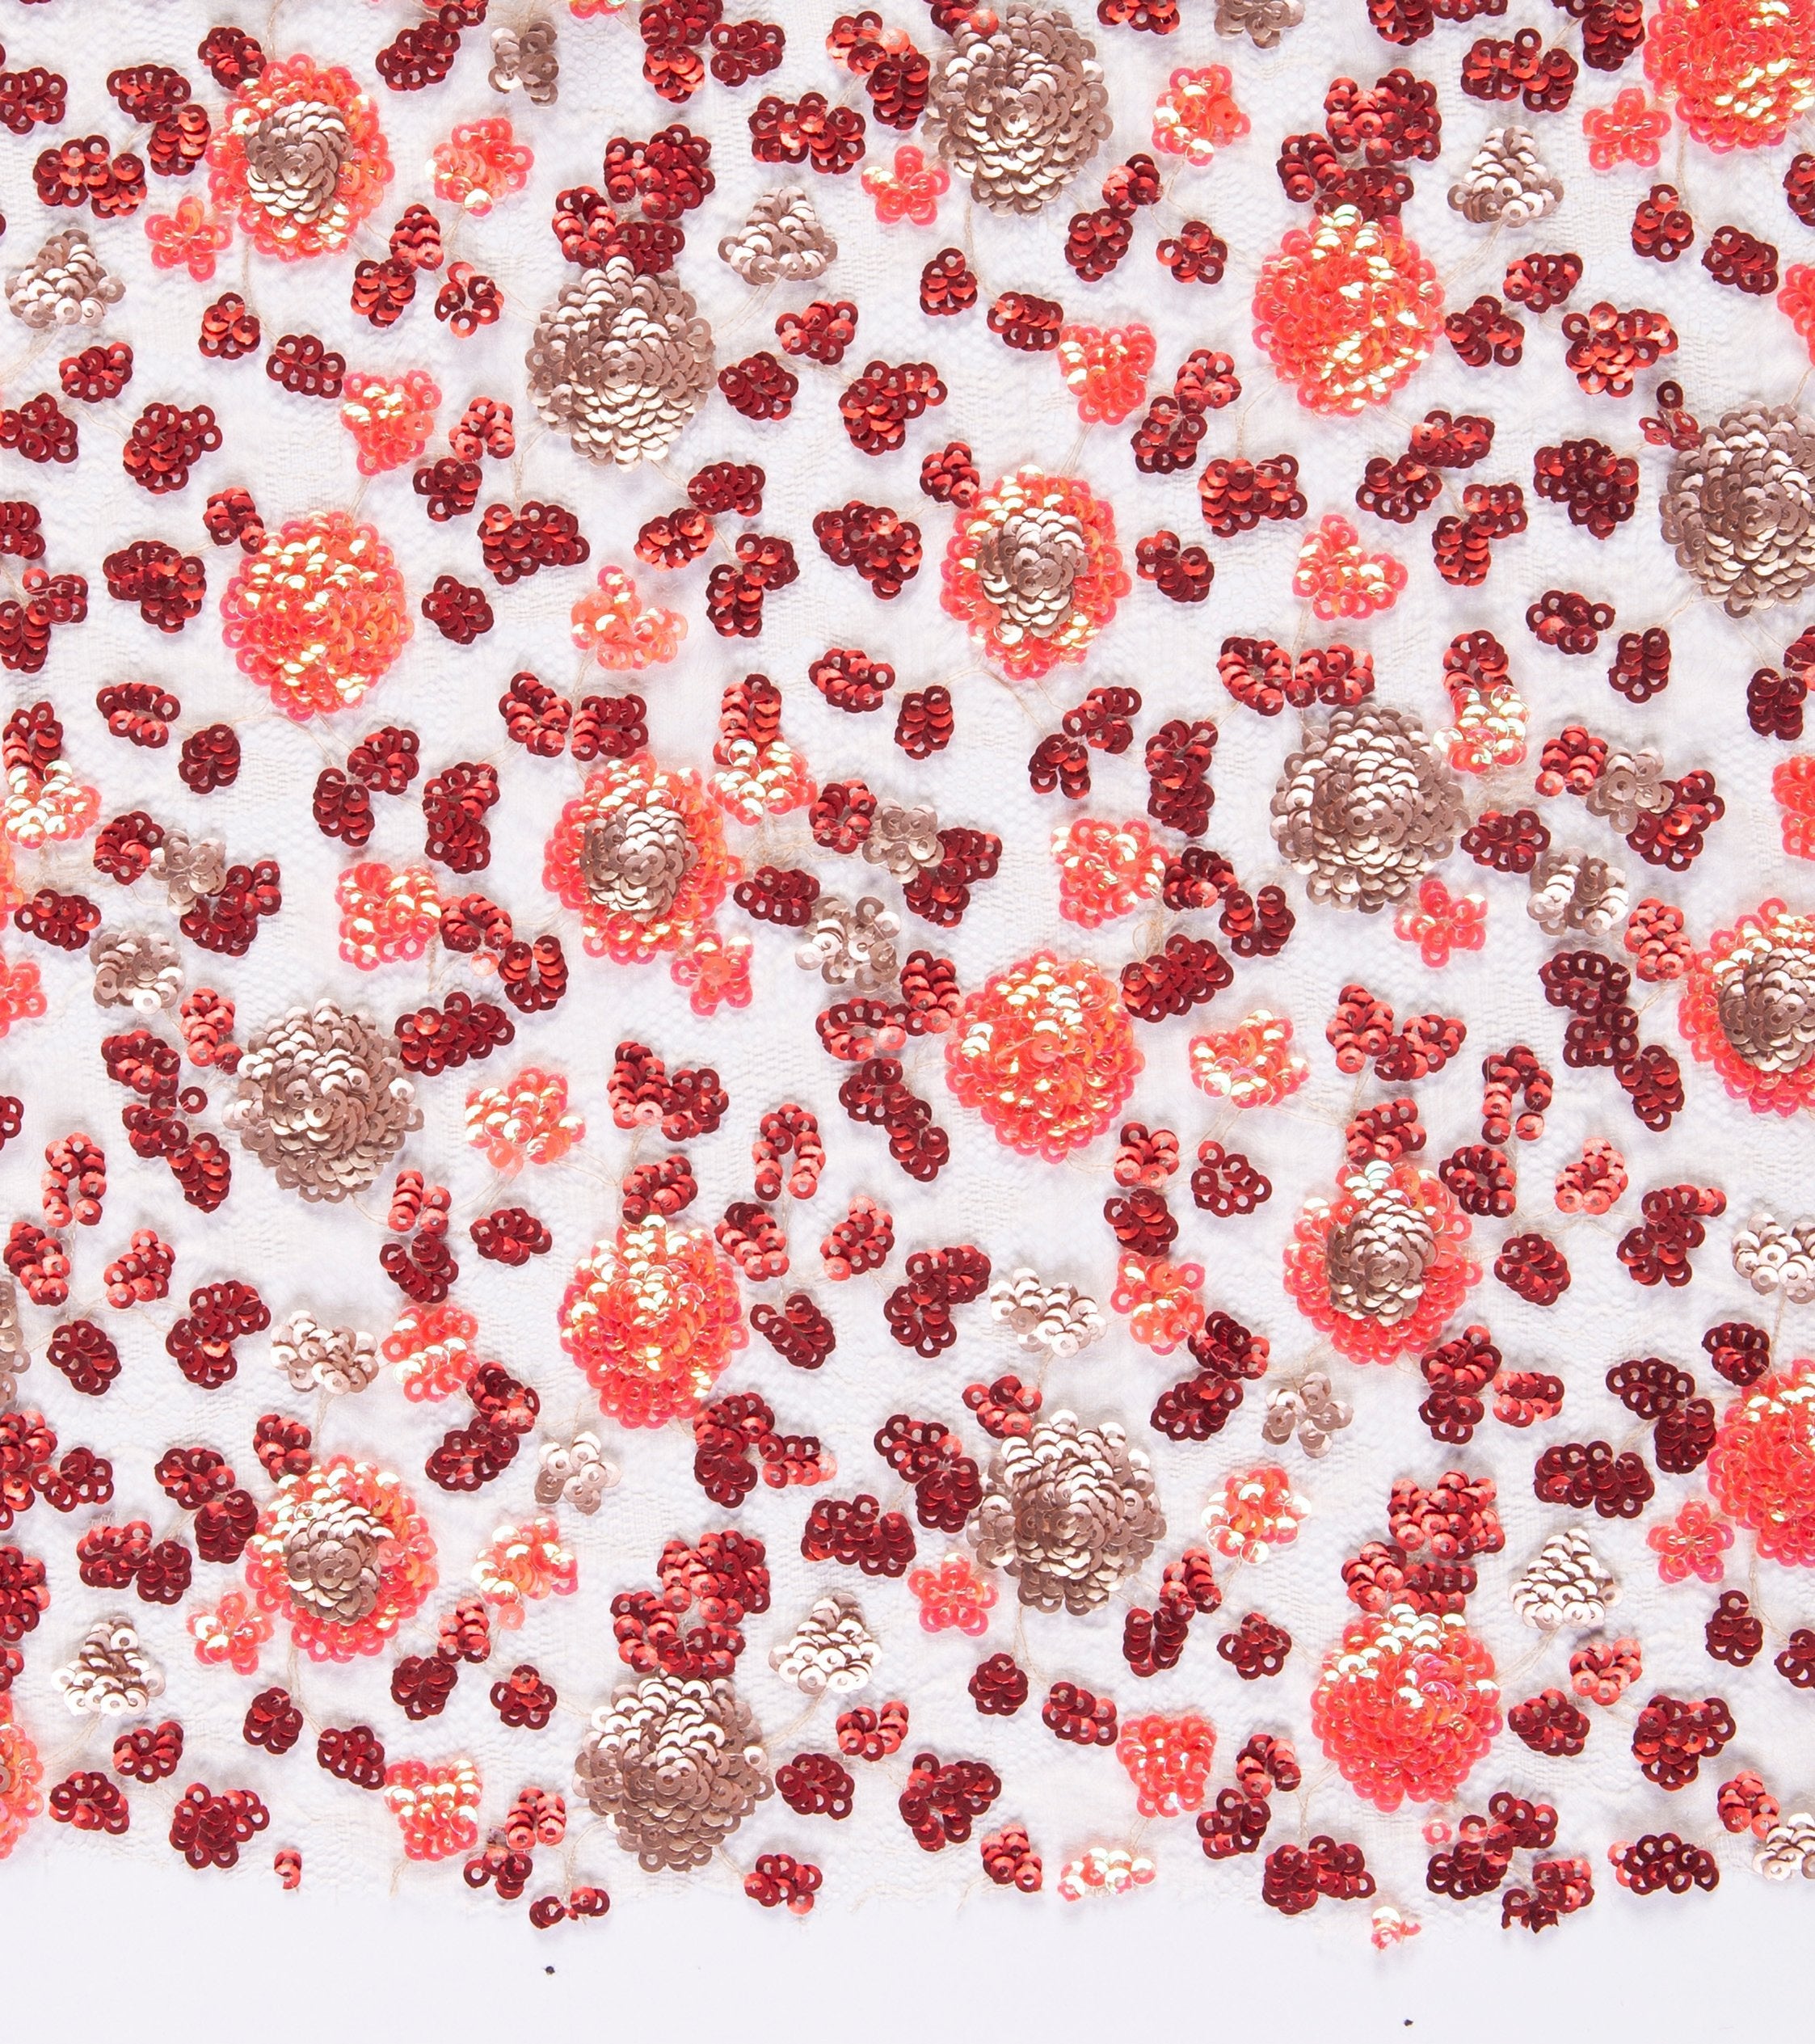 Colorful Sequin Embroidered Fabric with Coral Cluster Flower Design | Burç Fabric